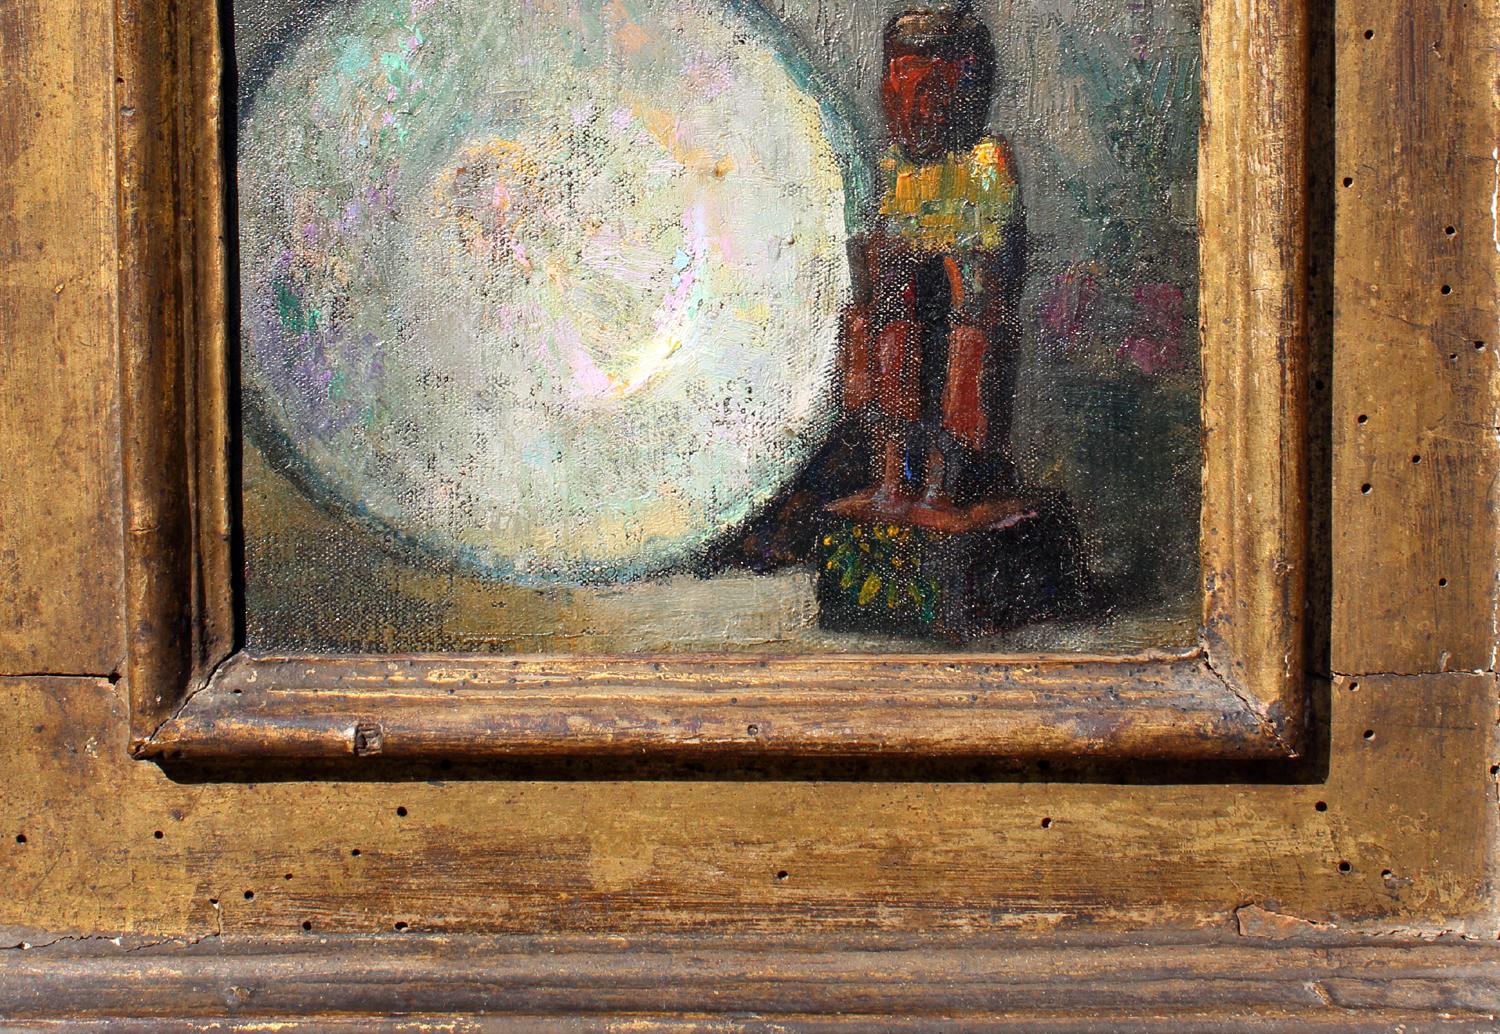 Title: Little God (La Petite Dieu).
This painting was displayed March 27th -  April 7th , 1928 artist exhibition at Grand Central Art Gallery, New York. Also published  exhibition catalog of paintings by Hovsep Pushman .  La Petite Dieu, 